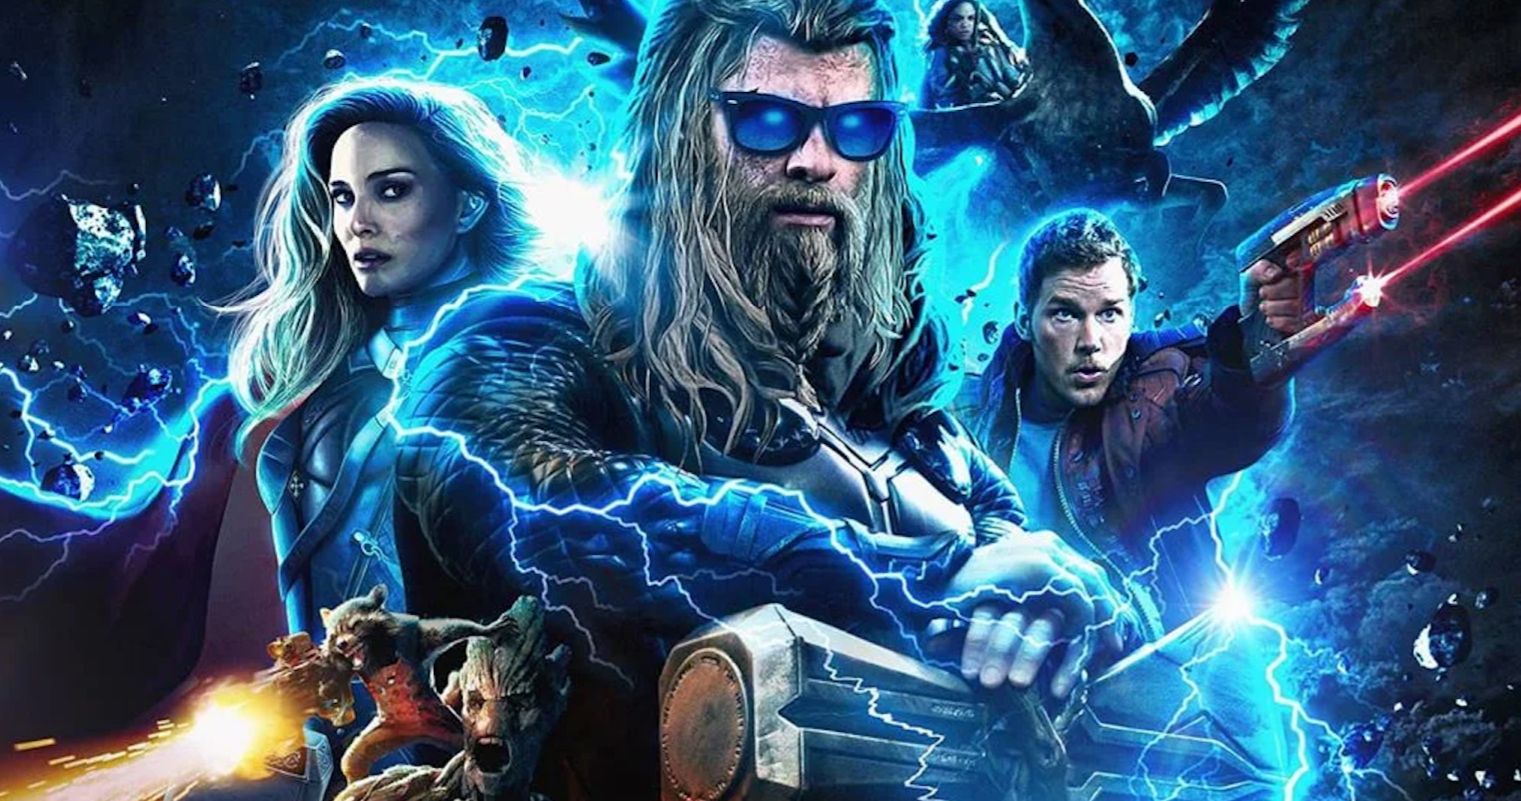 Guardians of the Galaxy Stars Exit Australia as Thor 4 Continues Filming Without Them